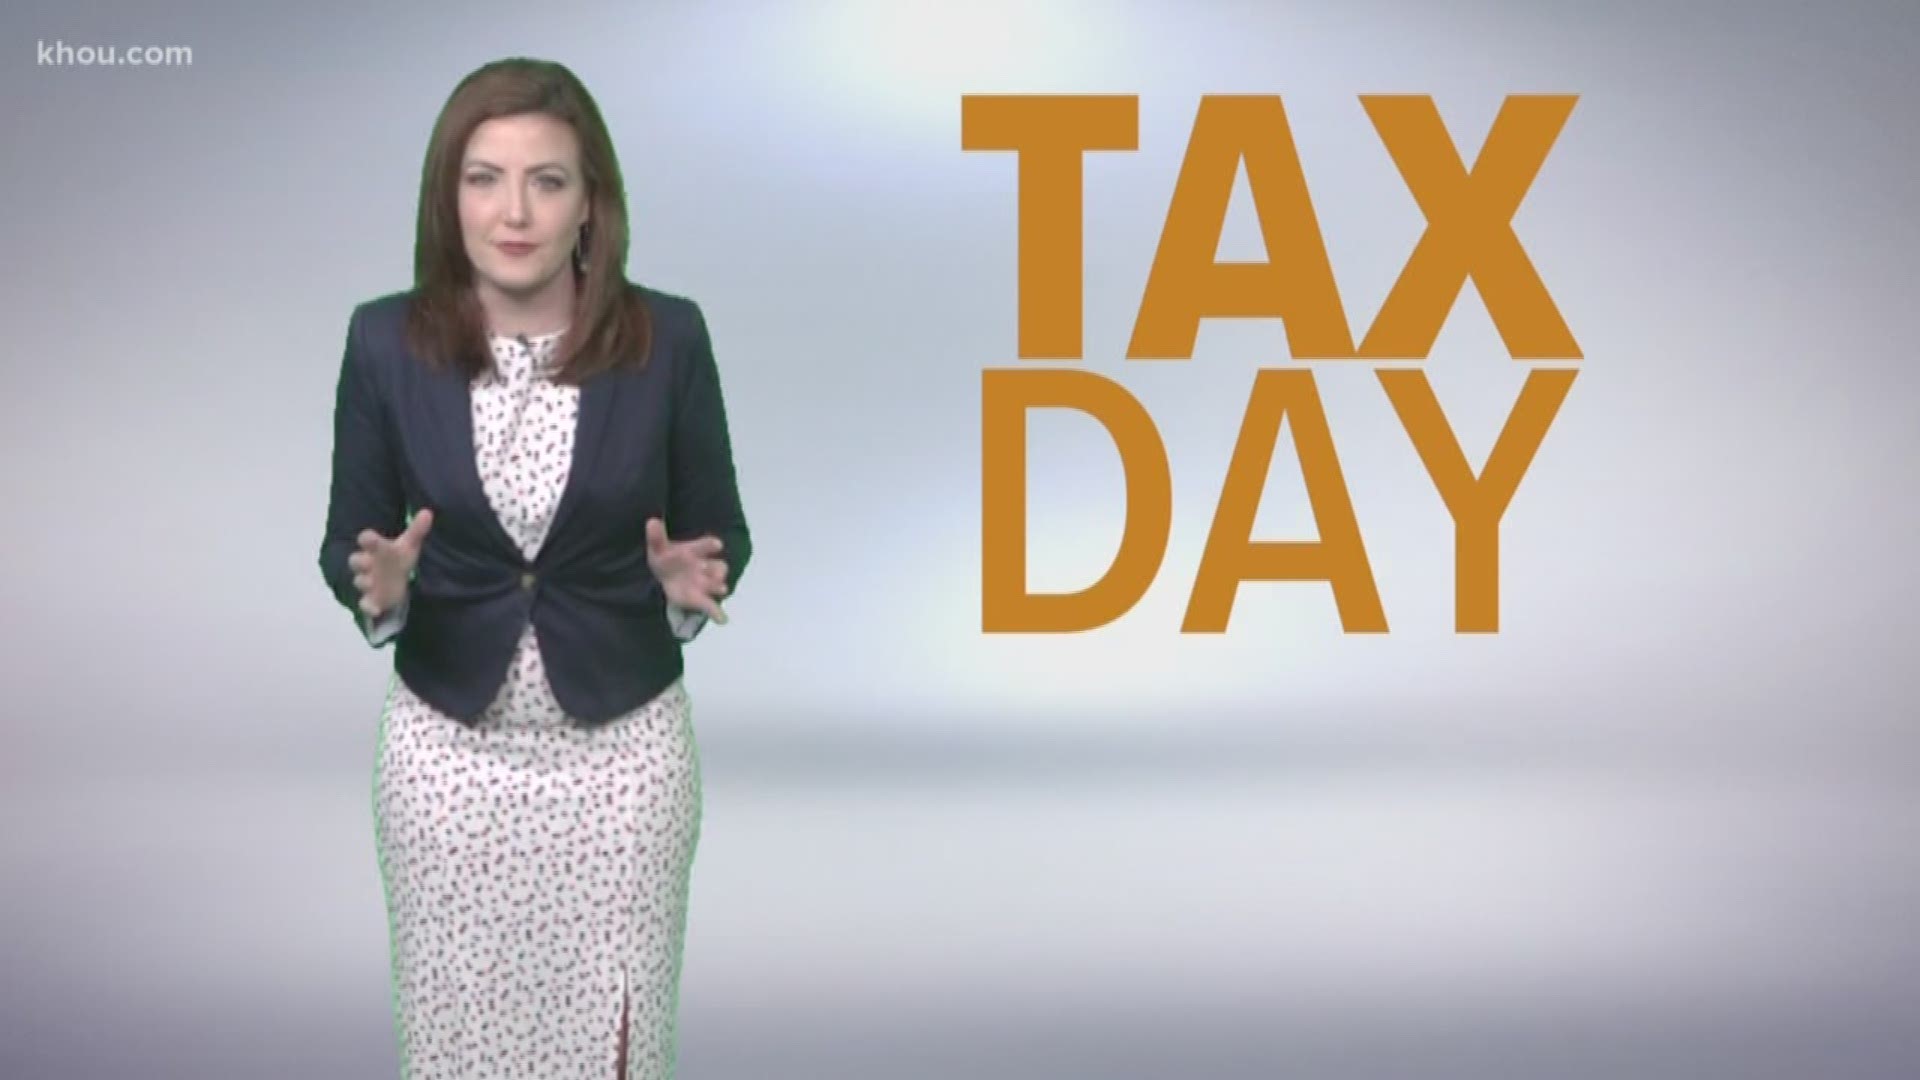 If you haven't filed your taxes yet, get a move on. Your return has to be postmarked by today … or submitted by midnight. But just how many of us file, and where does all that money go? Brandi's breaking down your taxes by the numbers.